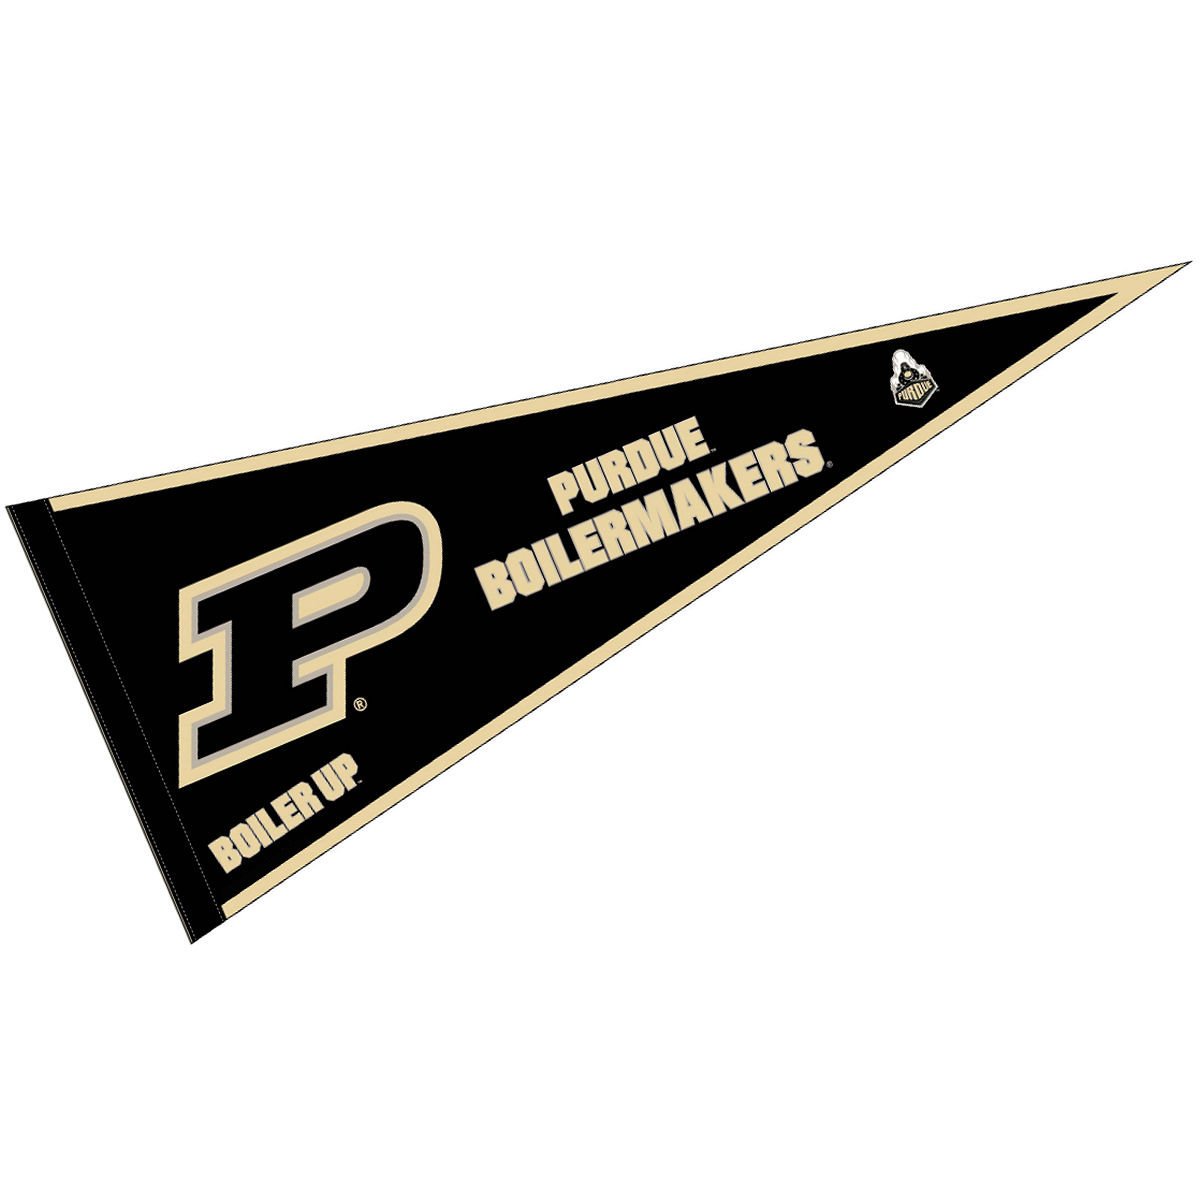 College Flags & Banners Co. Purdue Boilermakers Pennant Full Size Felt.